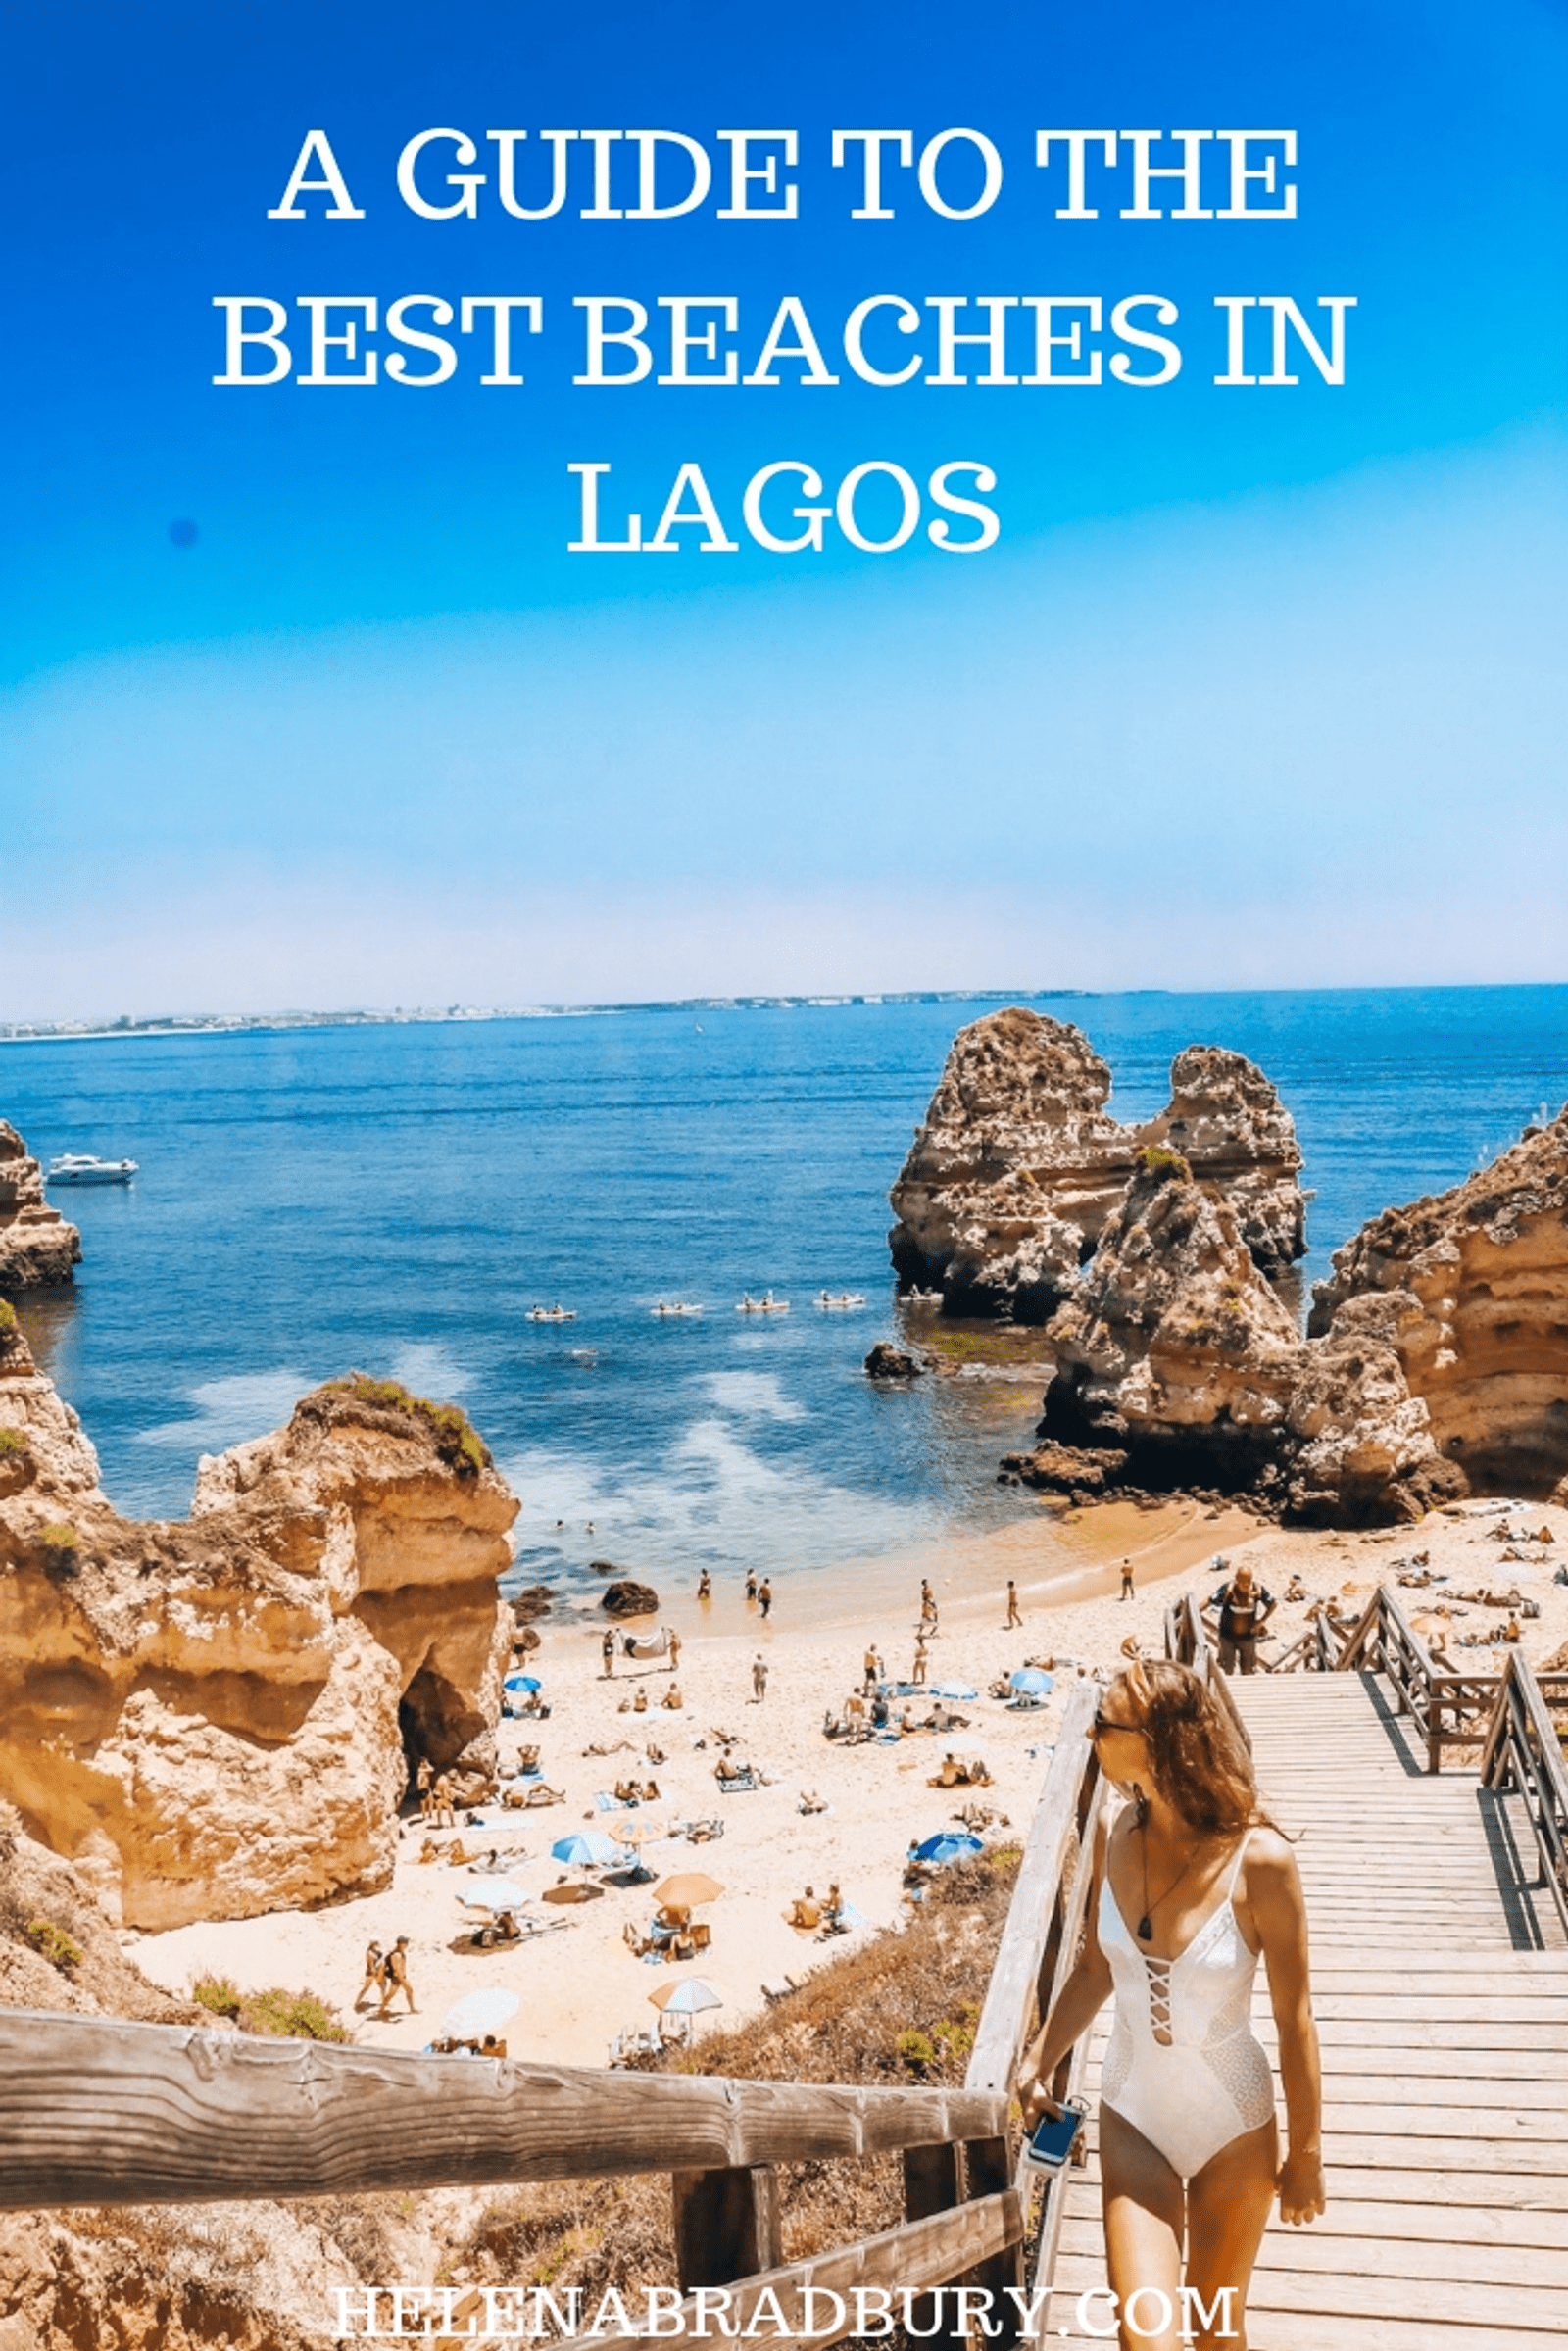 Your beach guide to the best beaches in Lagos, the Algarve. Whether you’re visiting for a week or a weekend these are the top beaches in Lagos Portugal that you need to visit | Portugal Beaches | Beaches in Lagos Portugal | What to do in Lagos Portu…